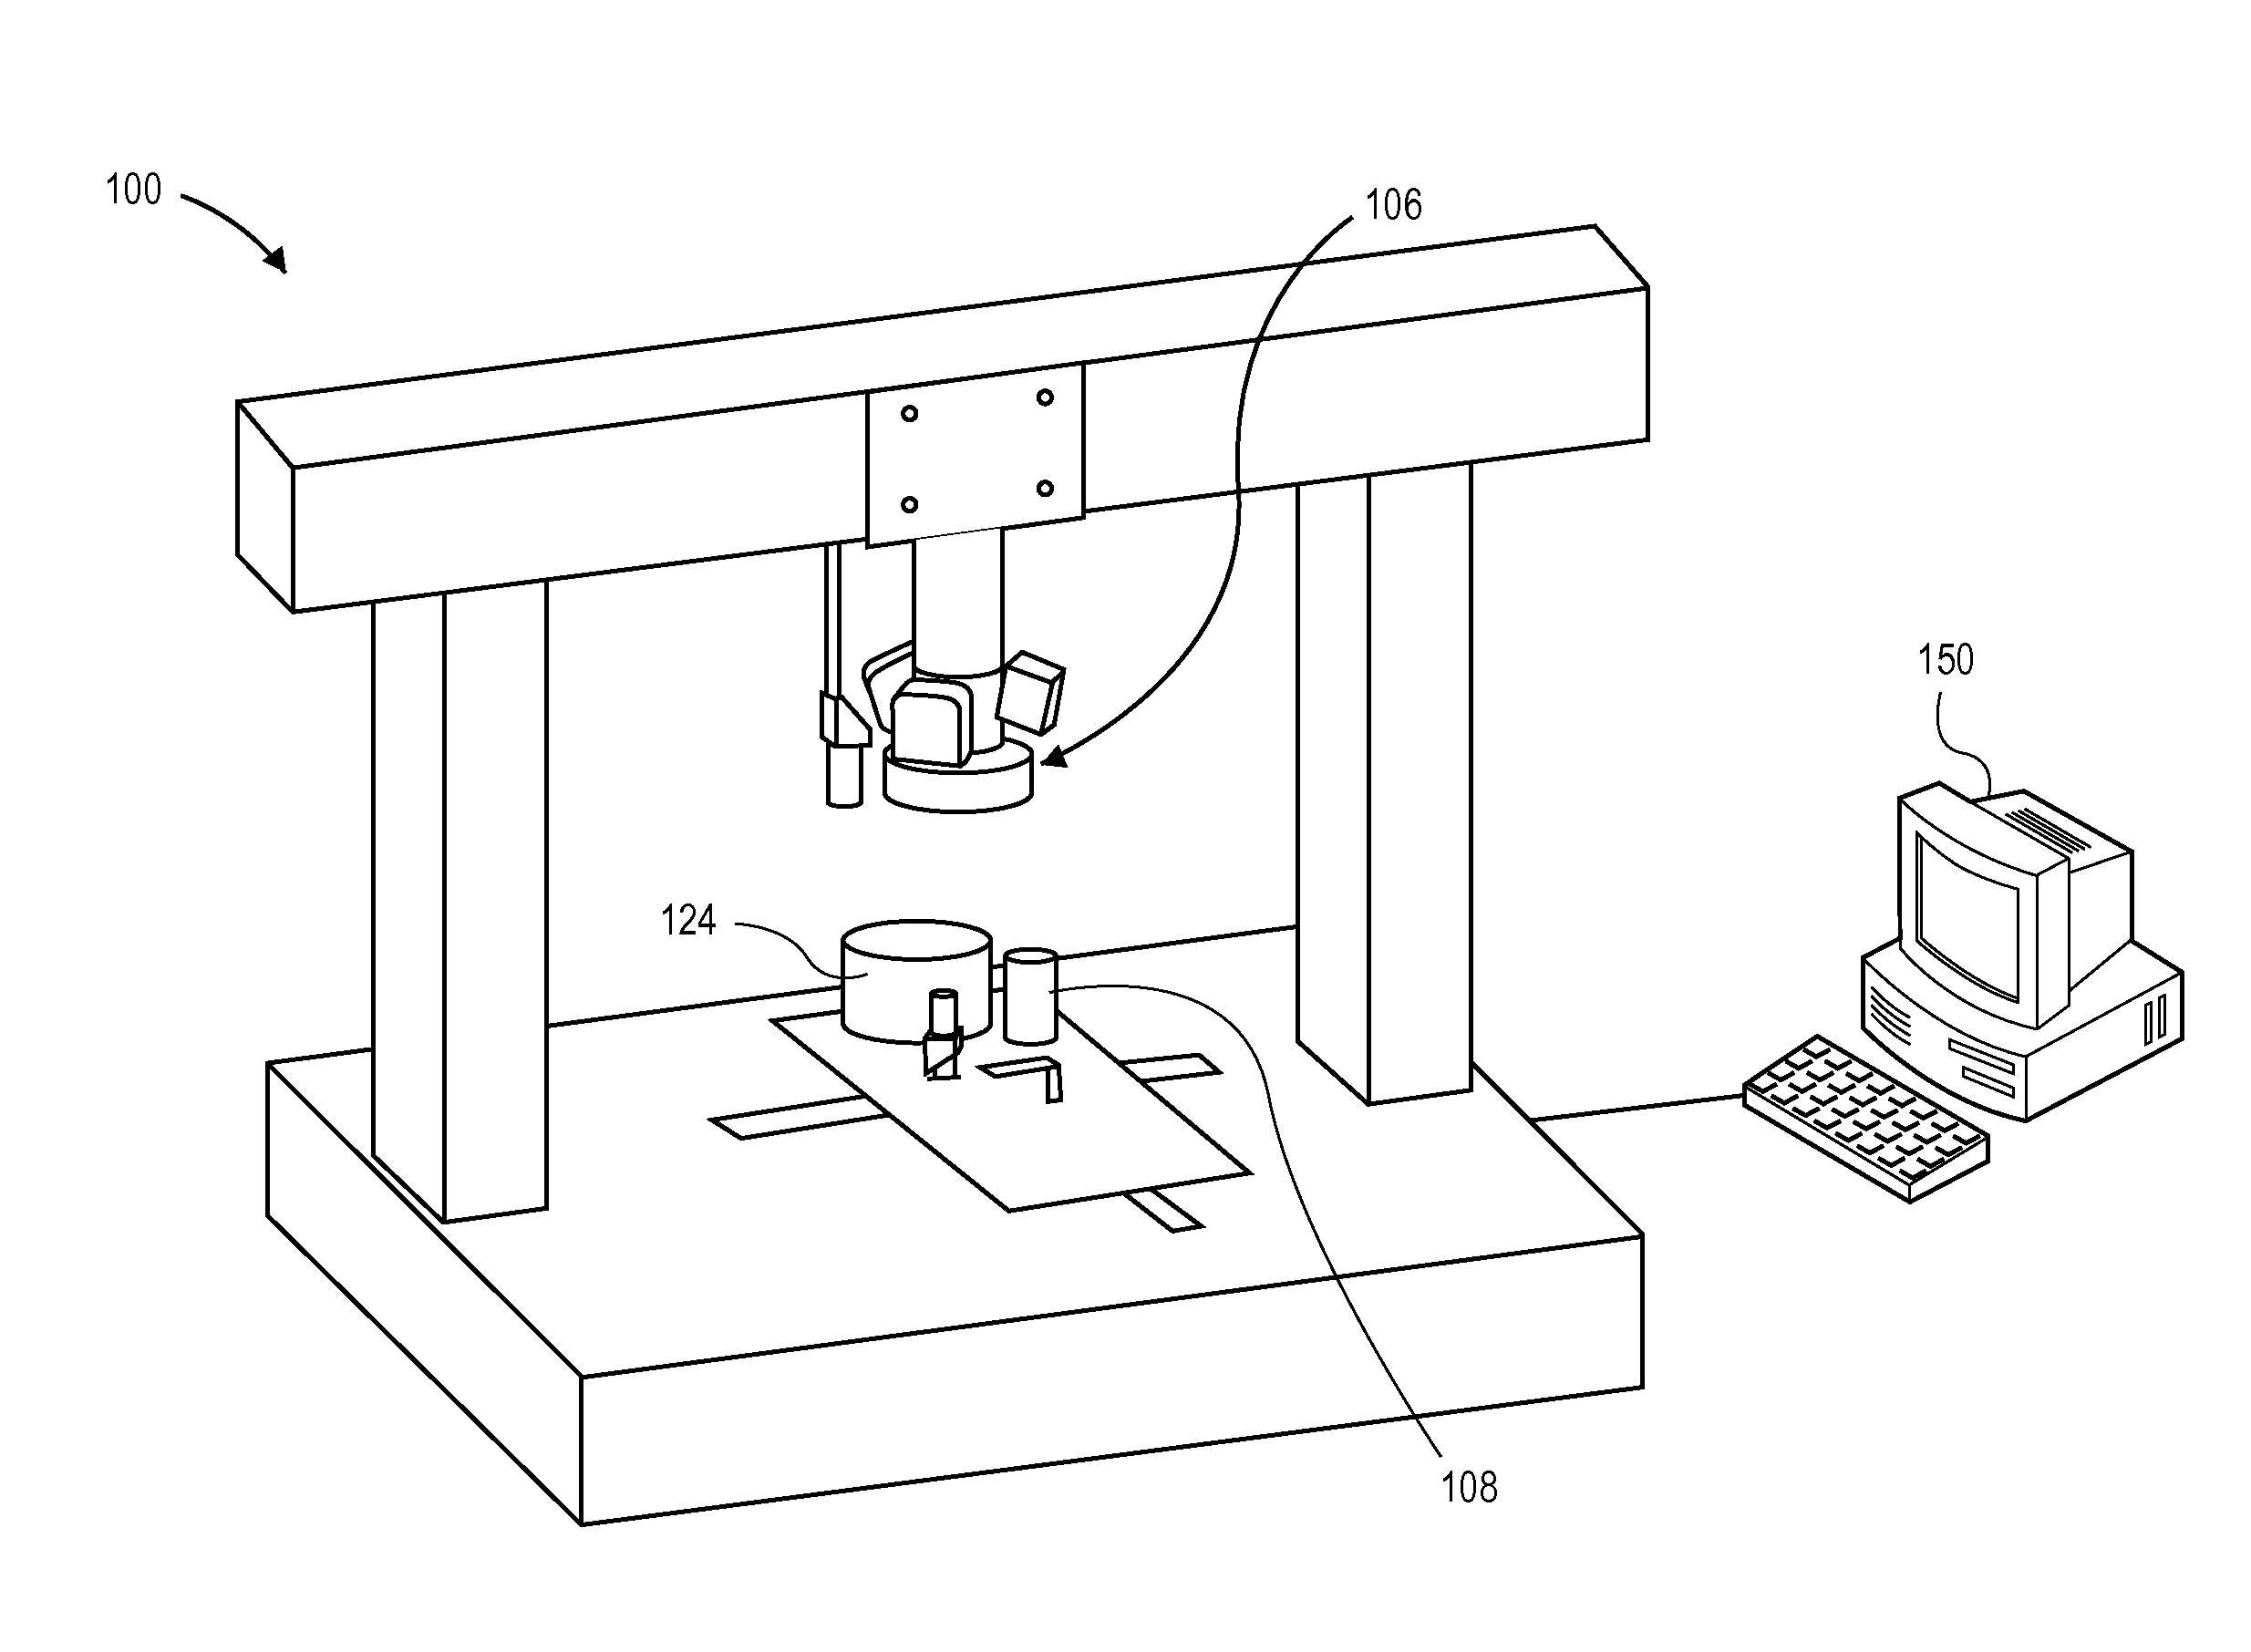 Micro device transfer system with pivot mount